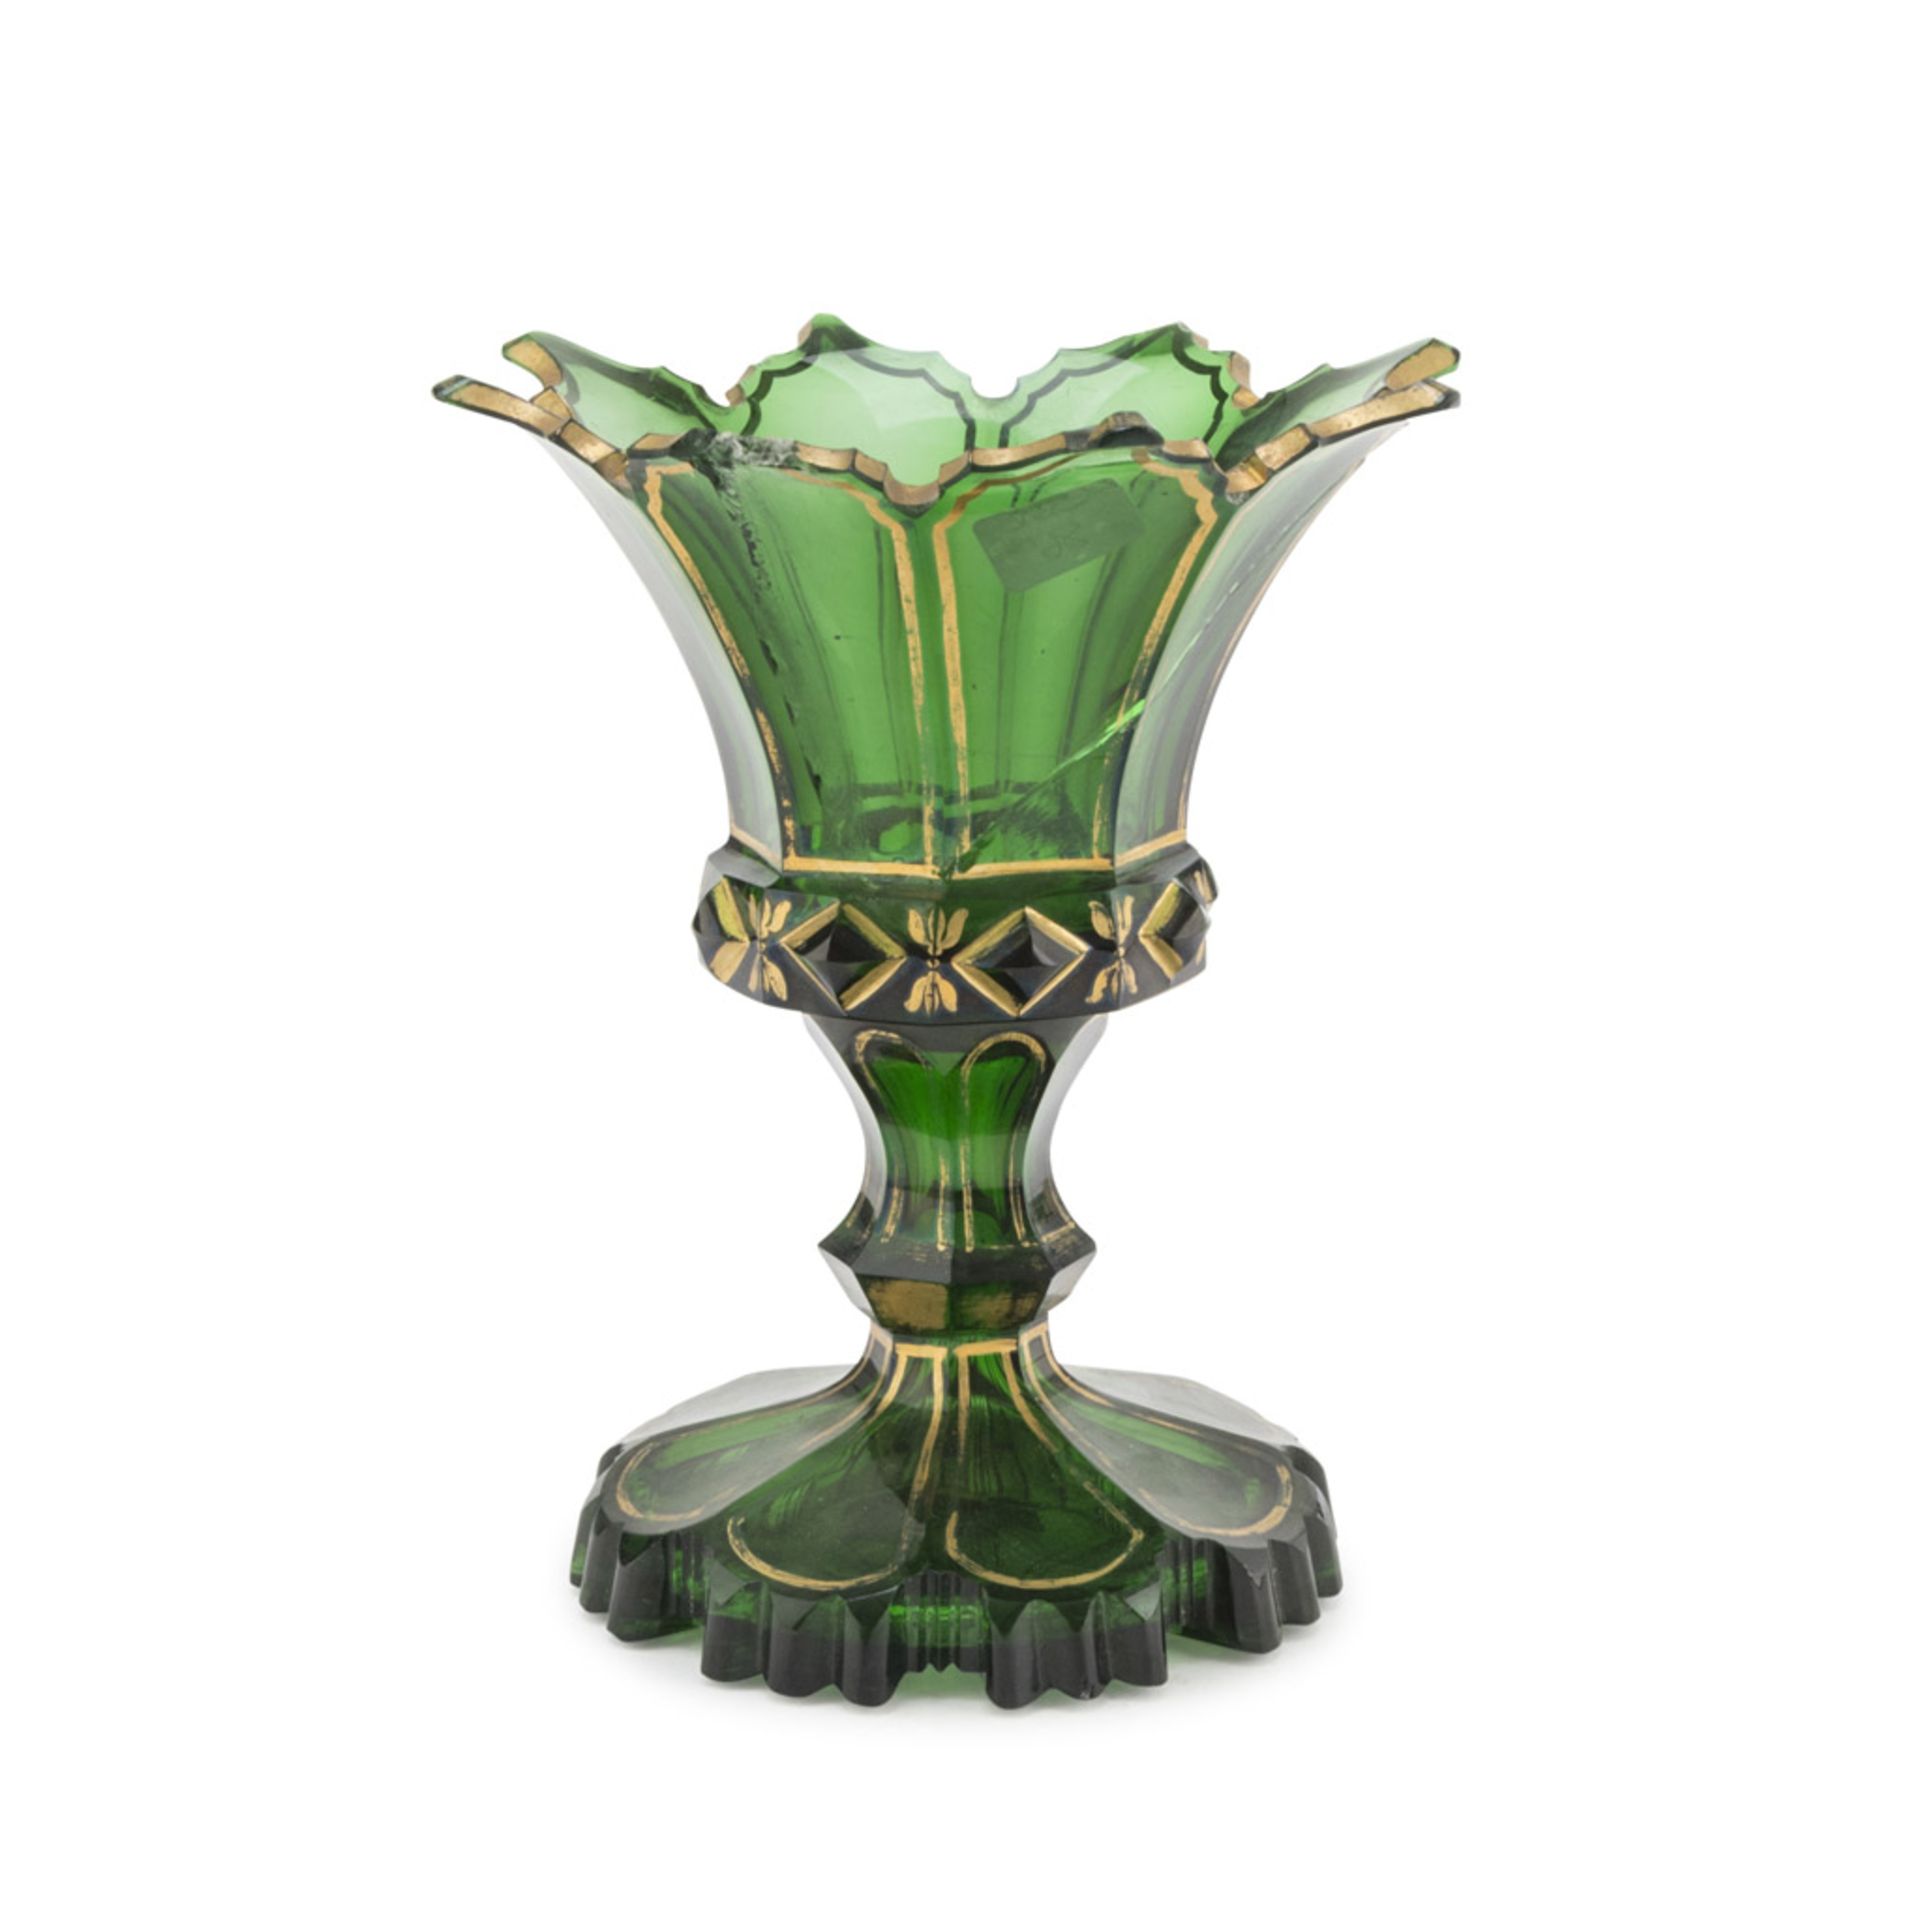 GLASS VASE, BOEMIA 20TH CENTURY with highlights in gold. Measures cm. 12 x 30. Breaks and defects.